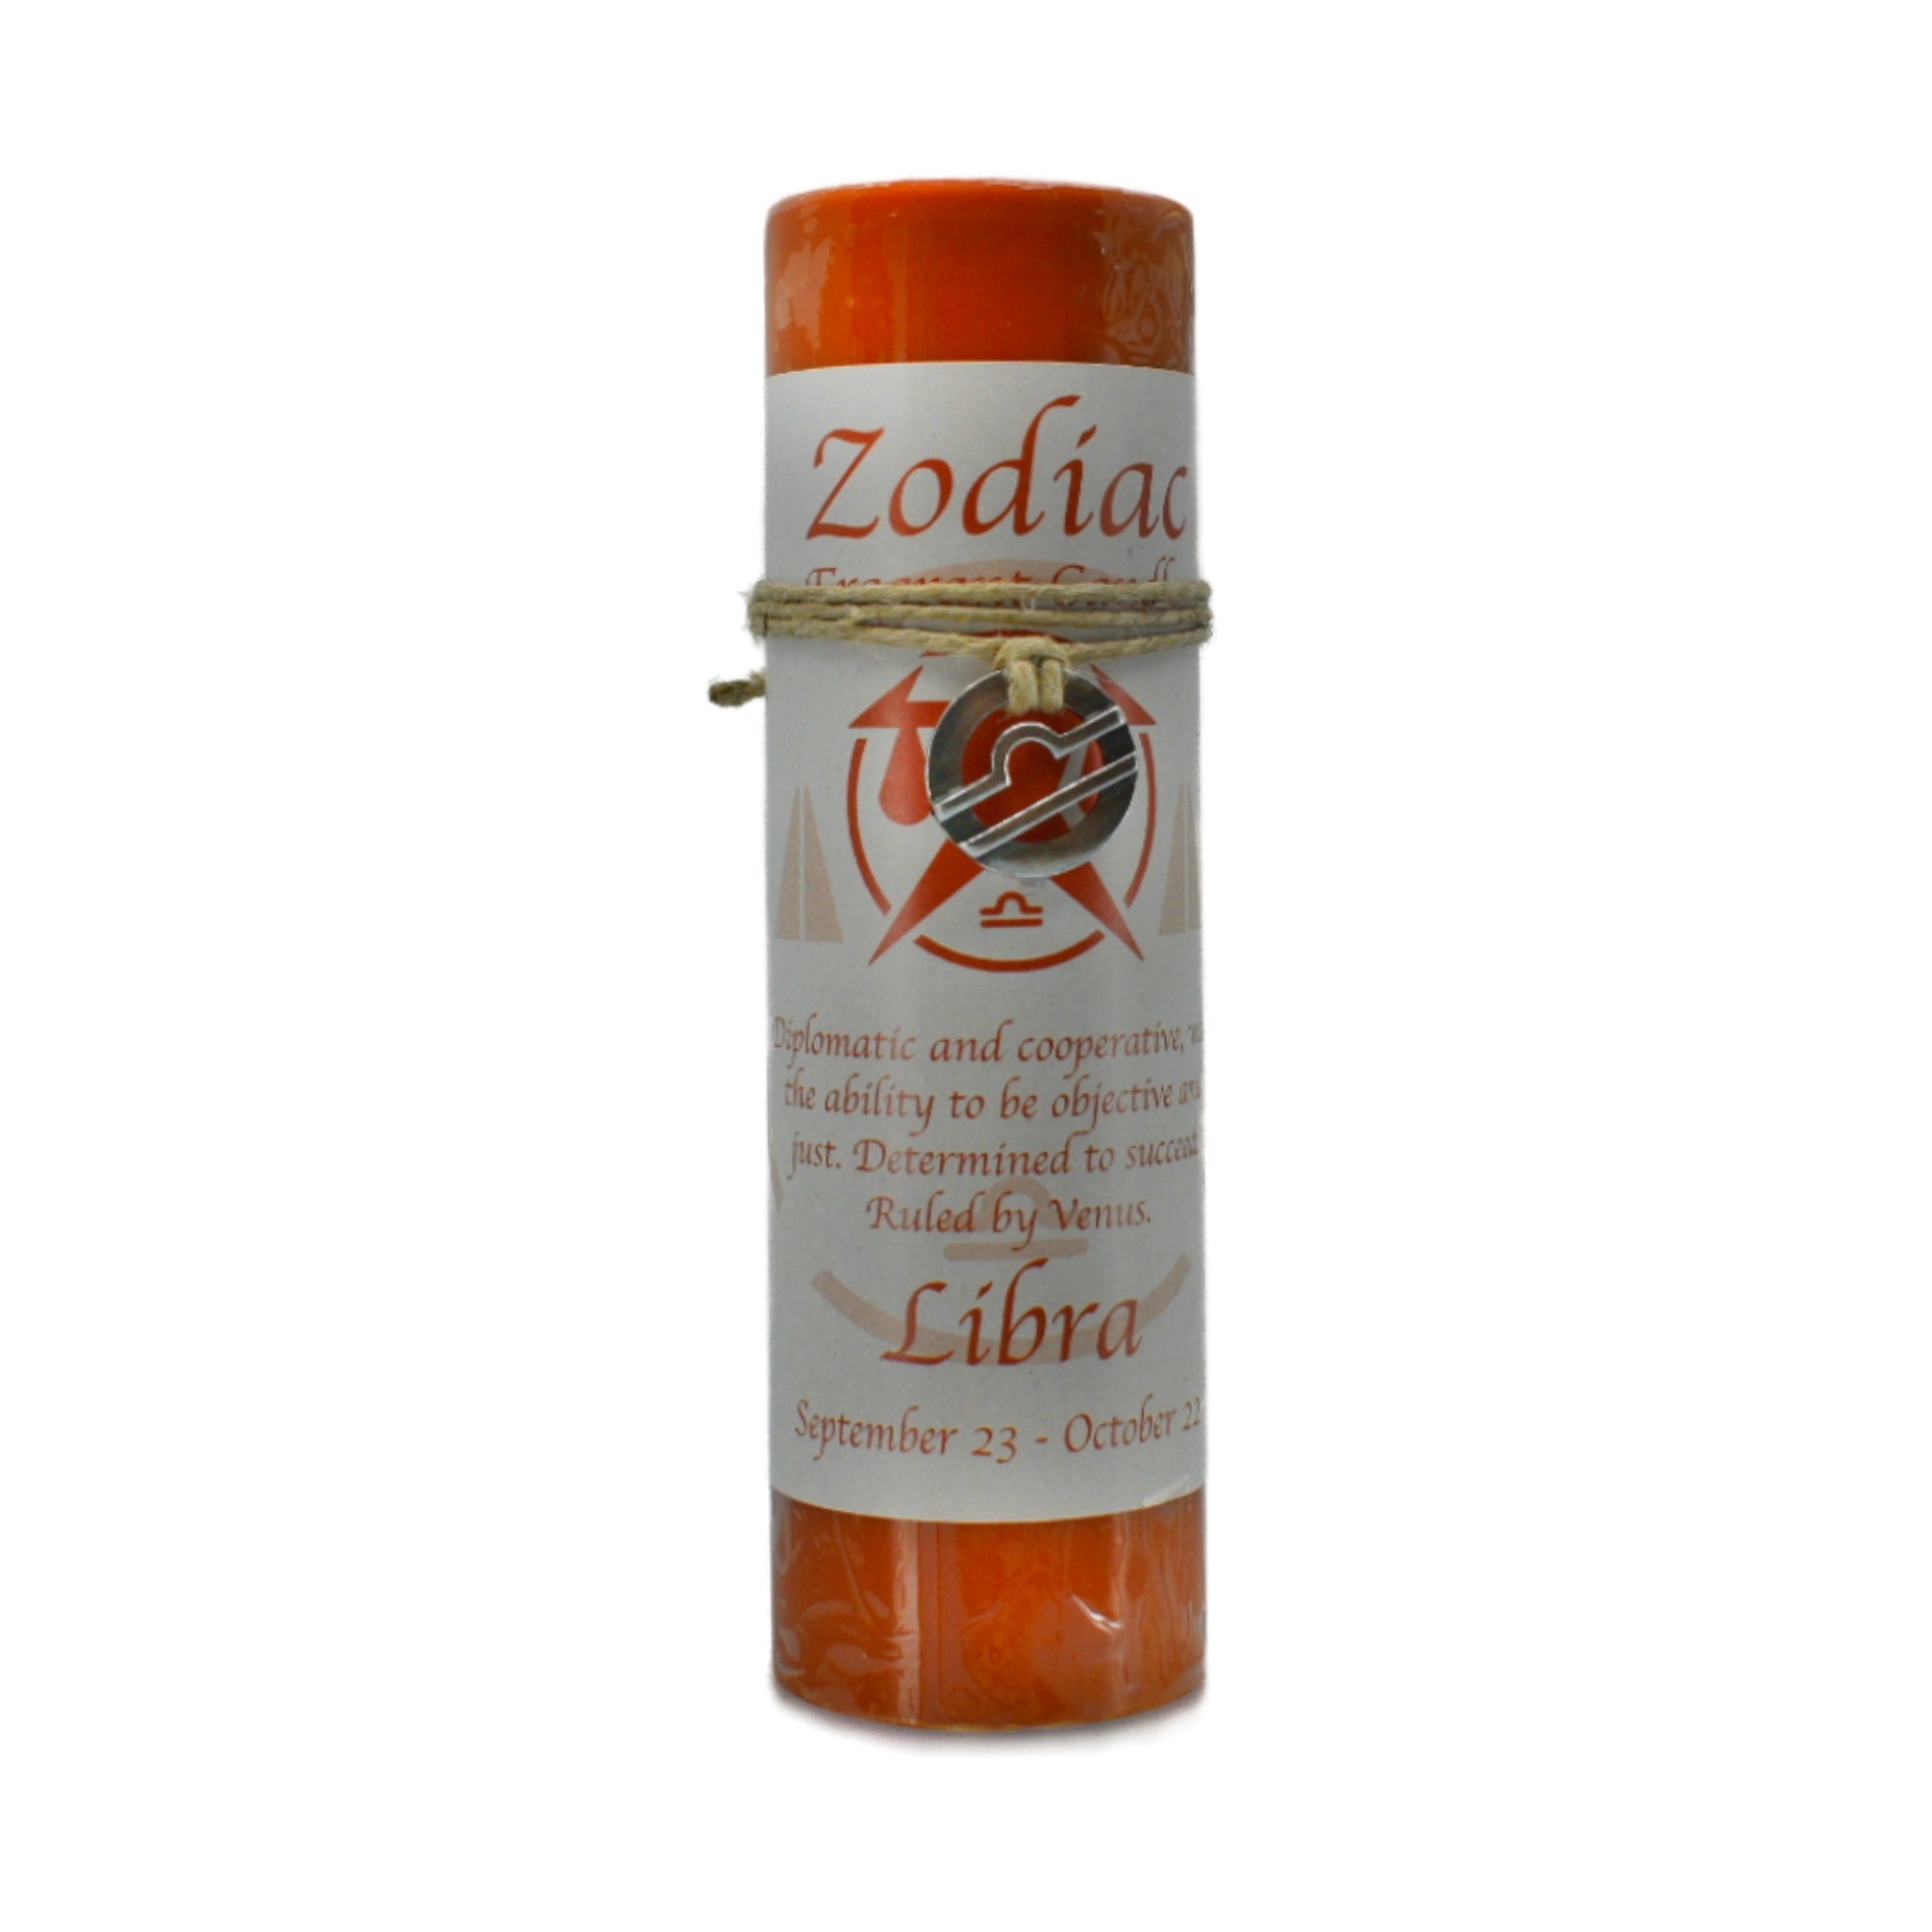 Libra Zodiac Pendant Candle.  Libra's a diplomatic and cooperative, with the ability to be objective and just, and determined to succeed.  Candle is a burnt orange color.